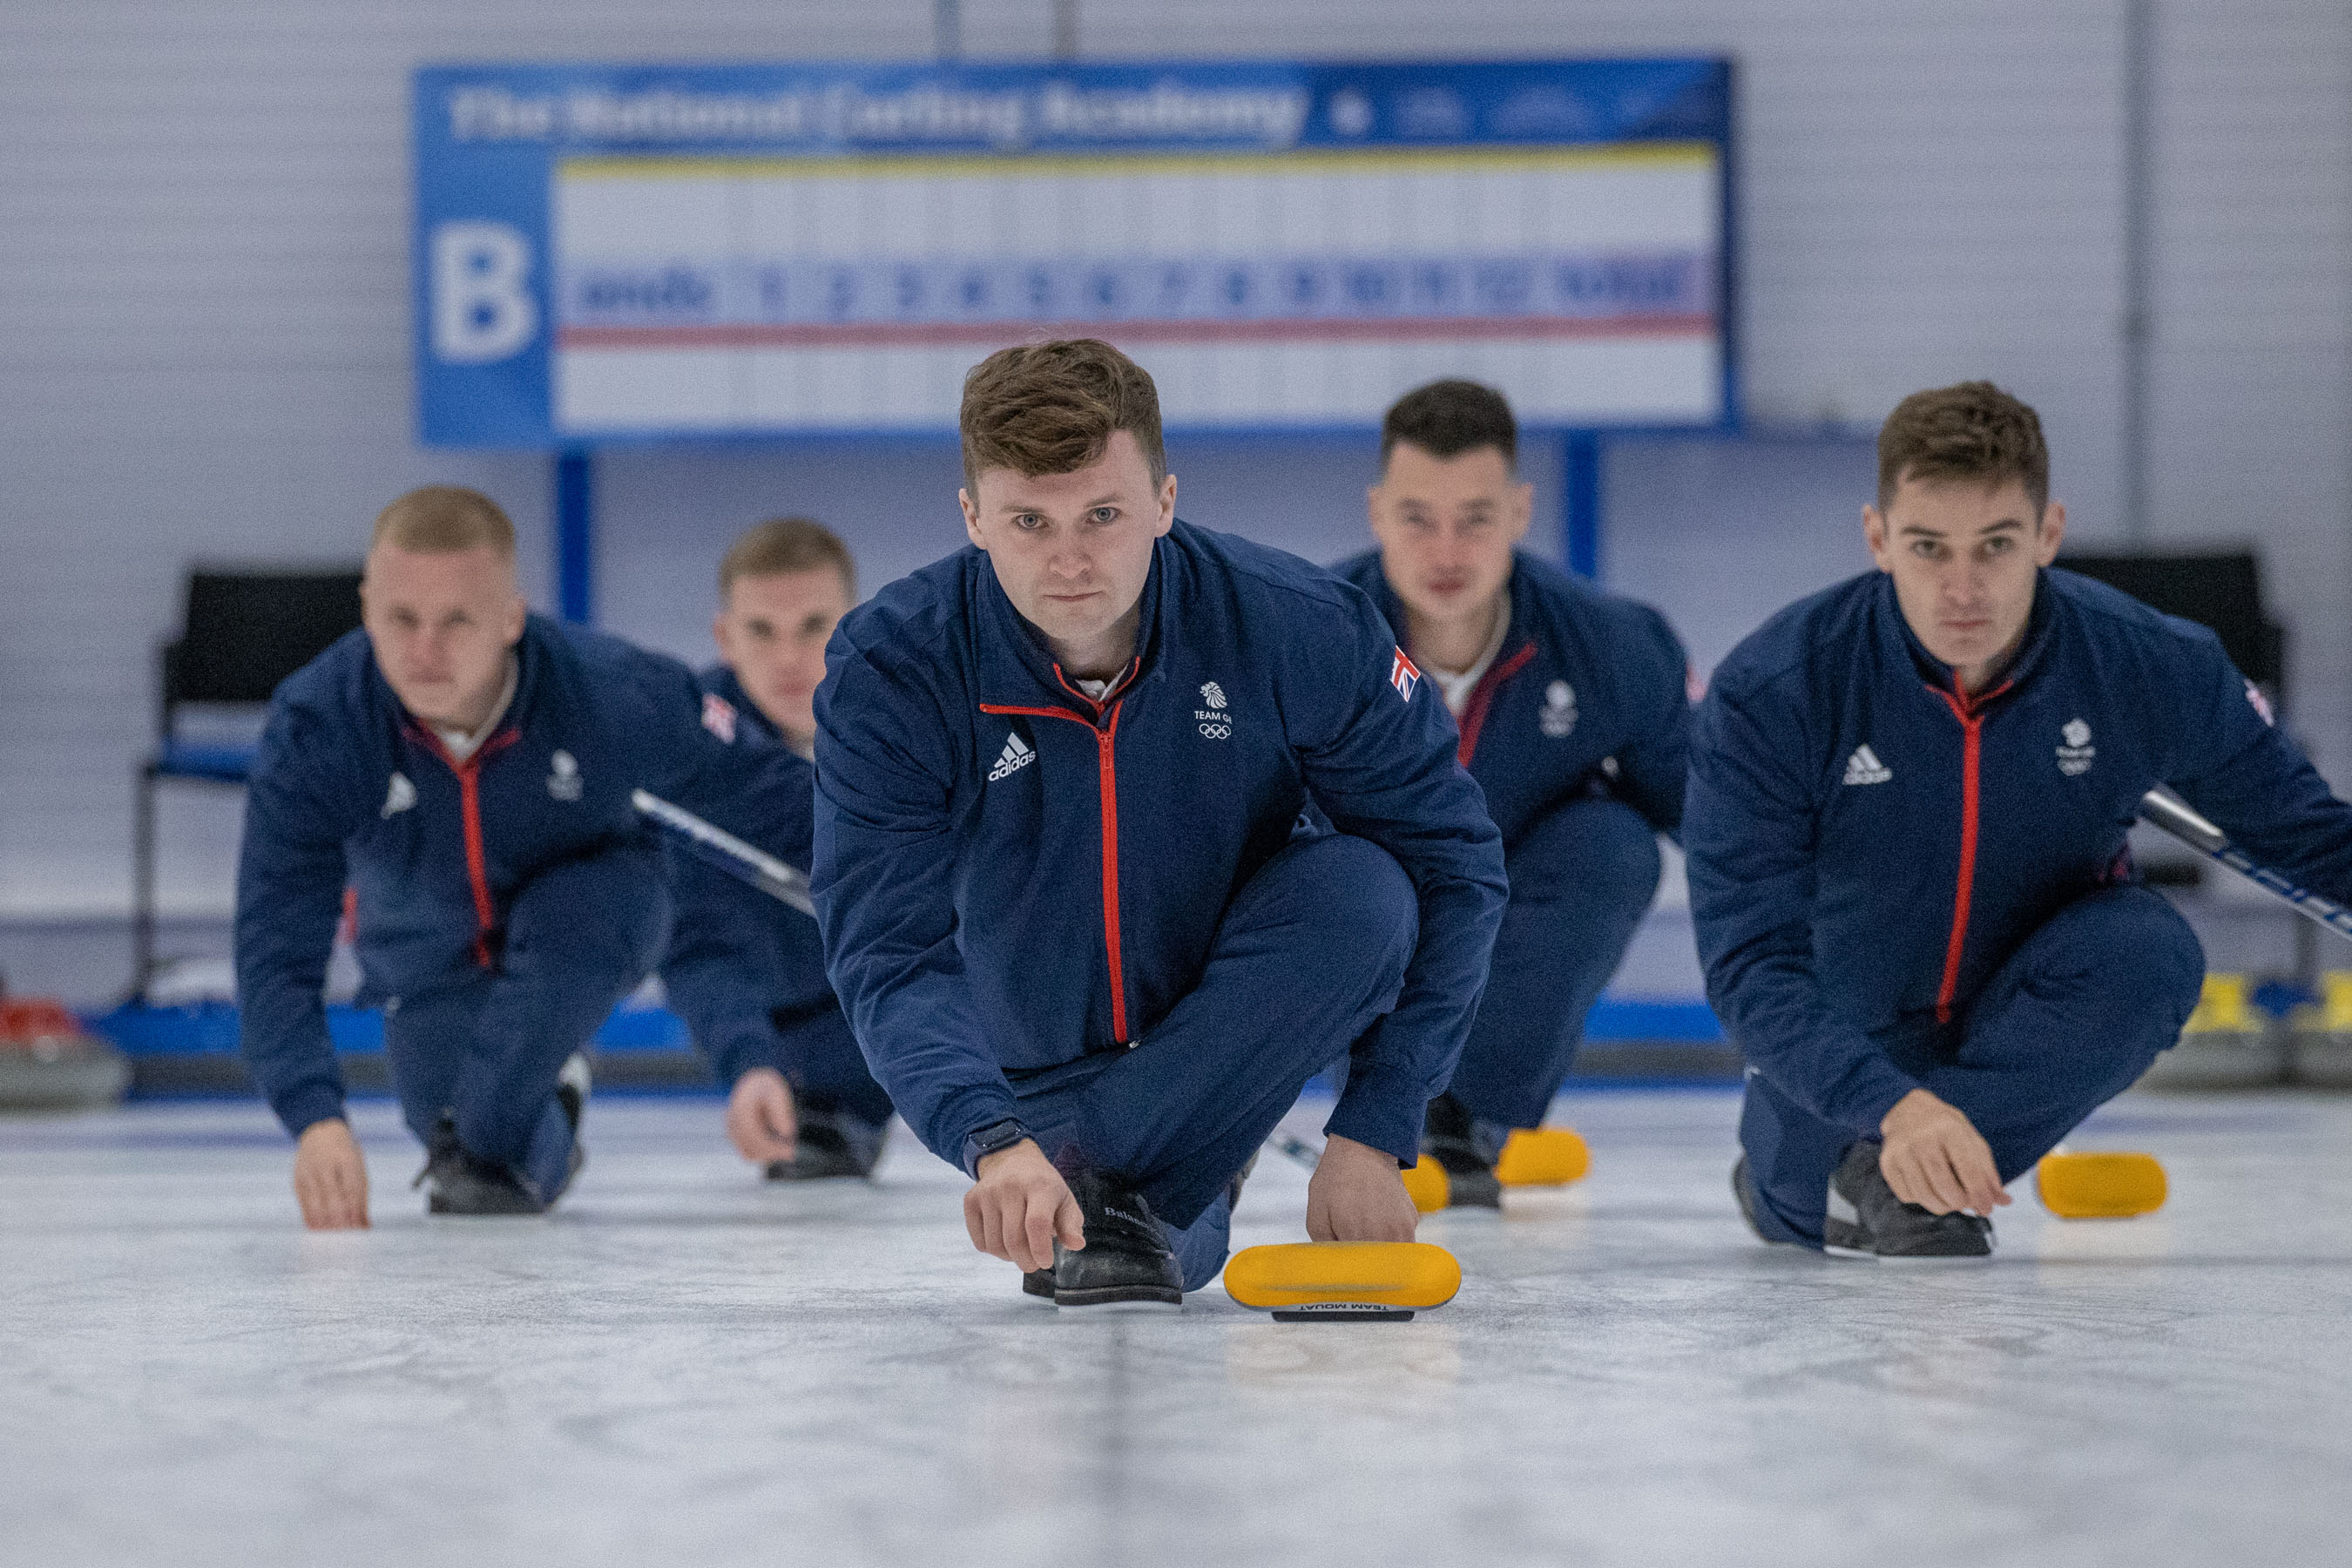 Team Mouat 'disappointed' to miss out on World Curling Championships  despite Olympic silver medals